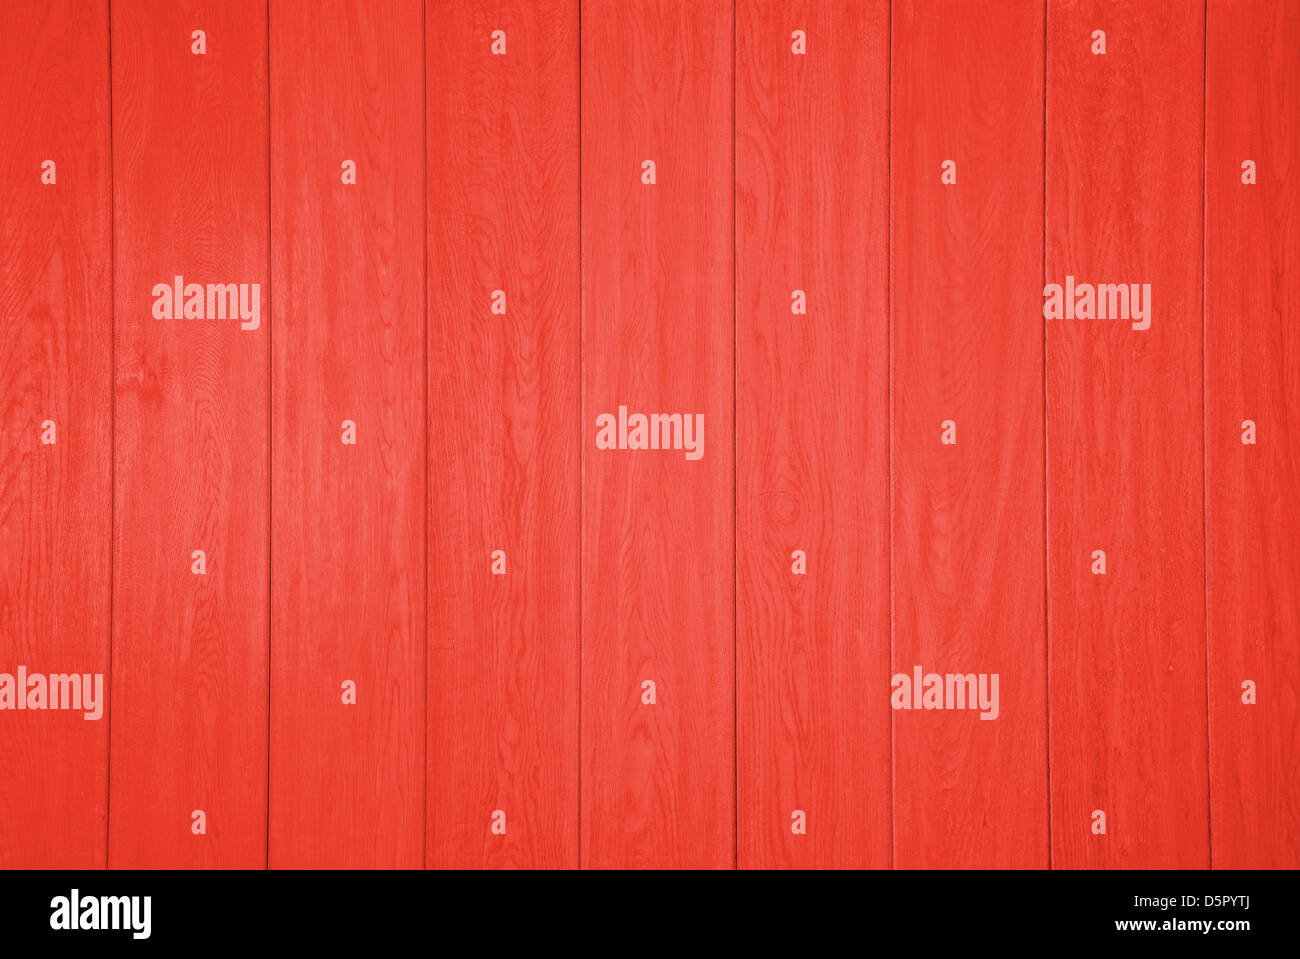 Red wooden wall painted bright red Stock Photo